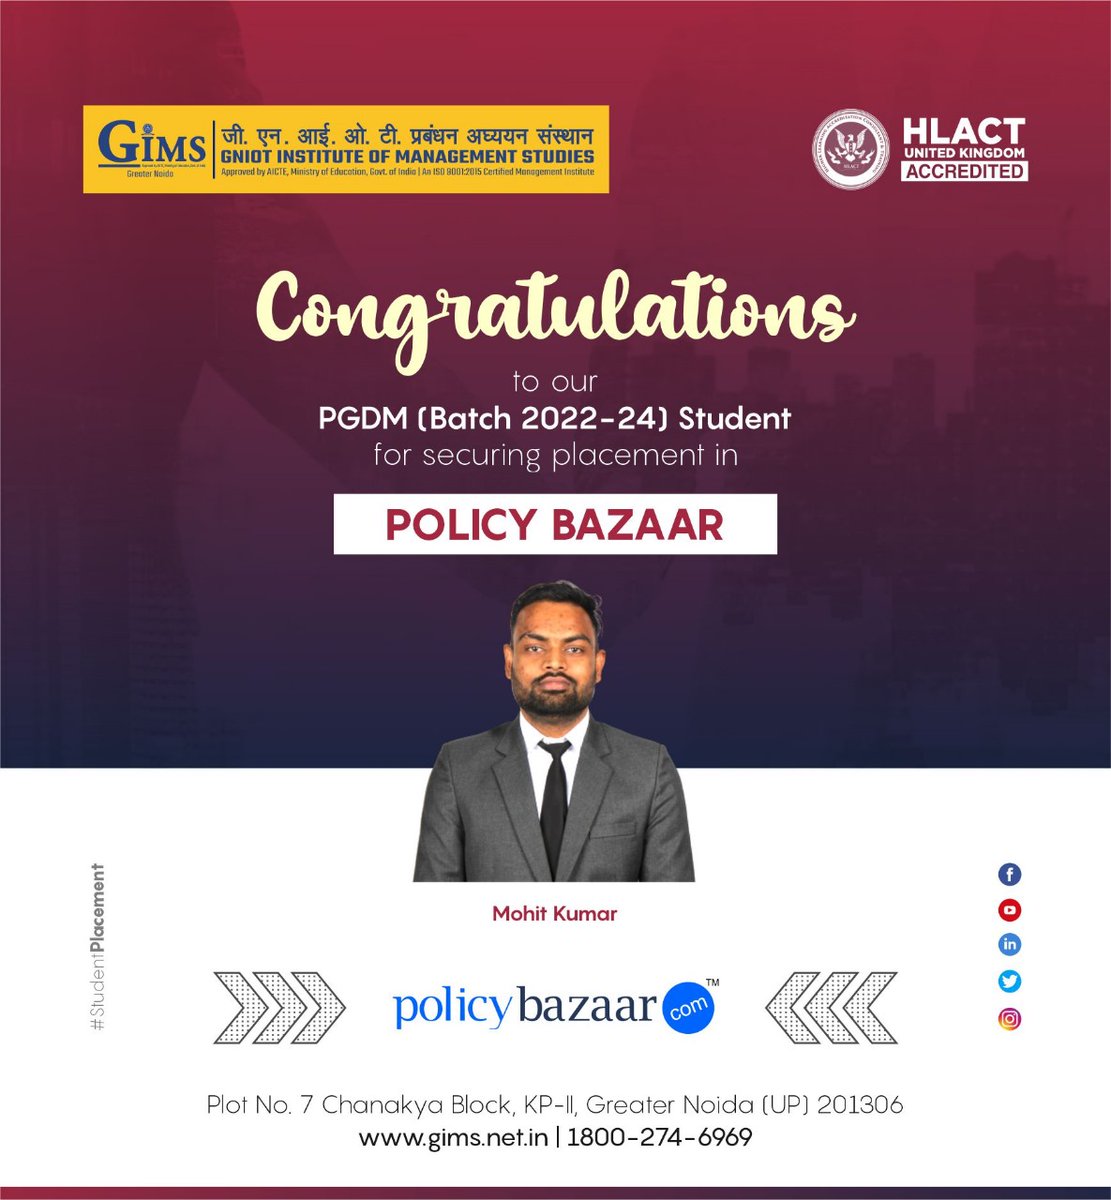 #GIMS, Greater Noida proudly announces the selection of its #PGDM 2022-24 Batch student in Policy Bazaar. We wish him the best for his bright corporate journey! 

#gniot #finalplacements #ideatoexecution #careerprogression #gimscrc

Visit Website: gims.net.in